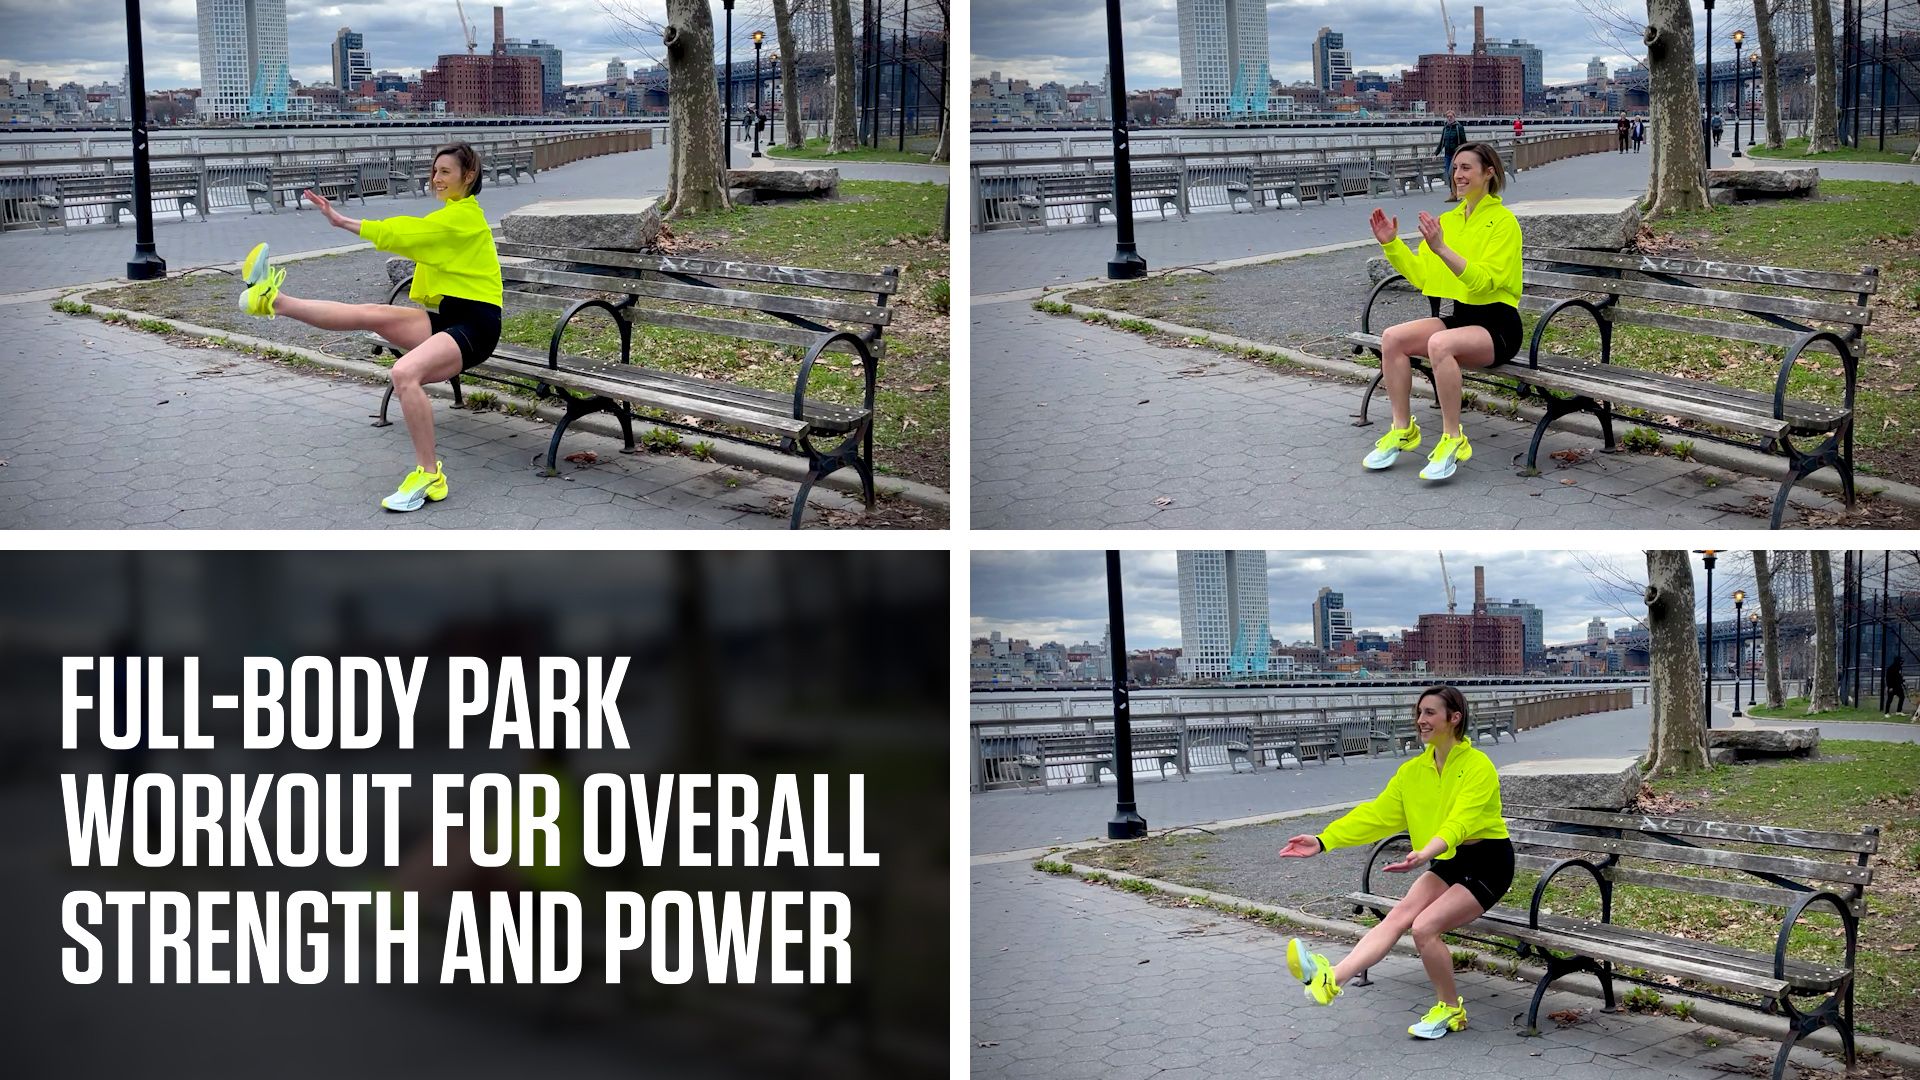 This Full-Body Park Workout Builds All-Over Strength